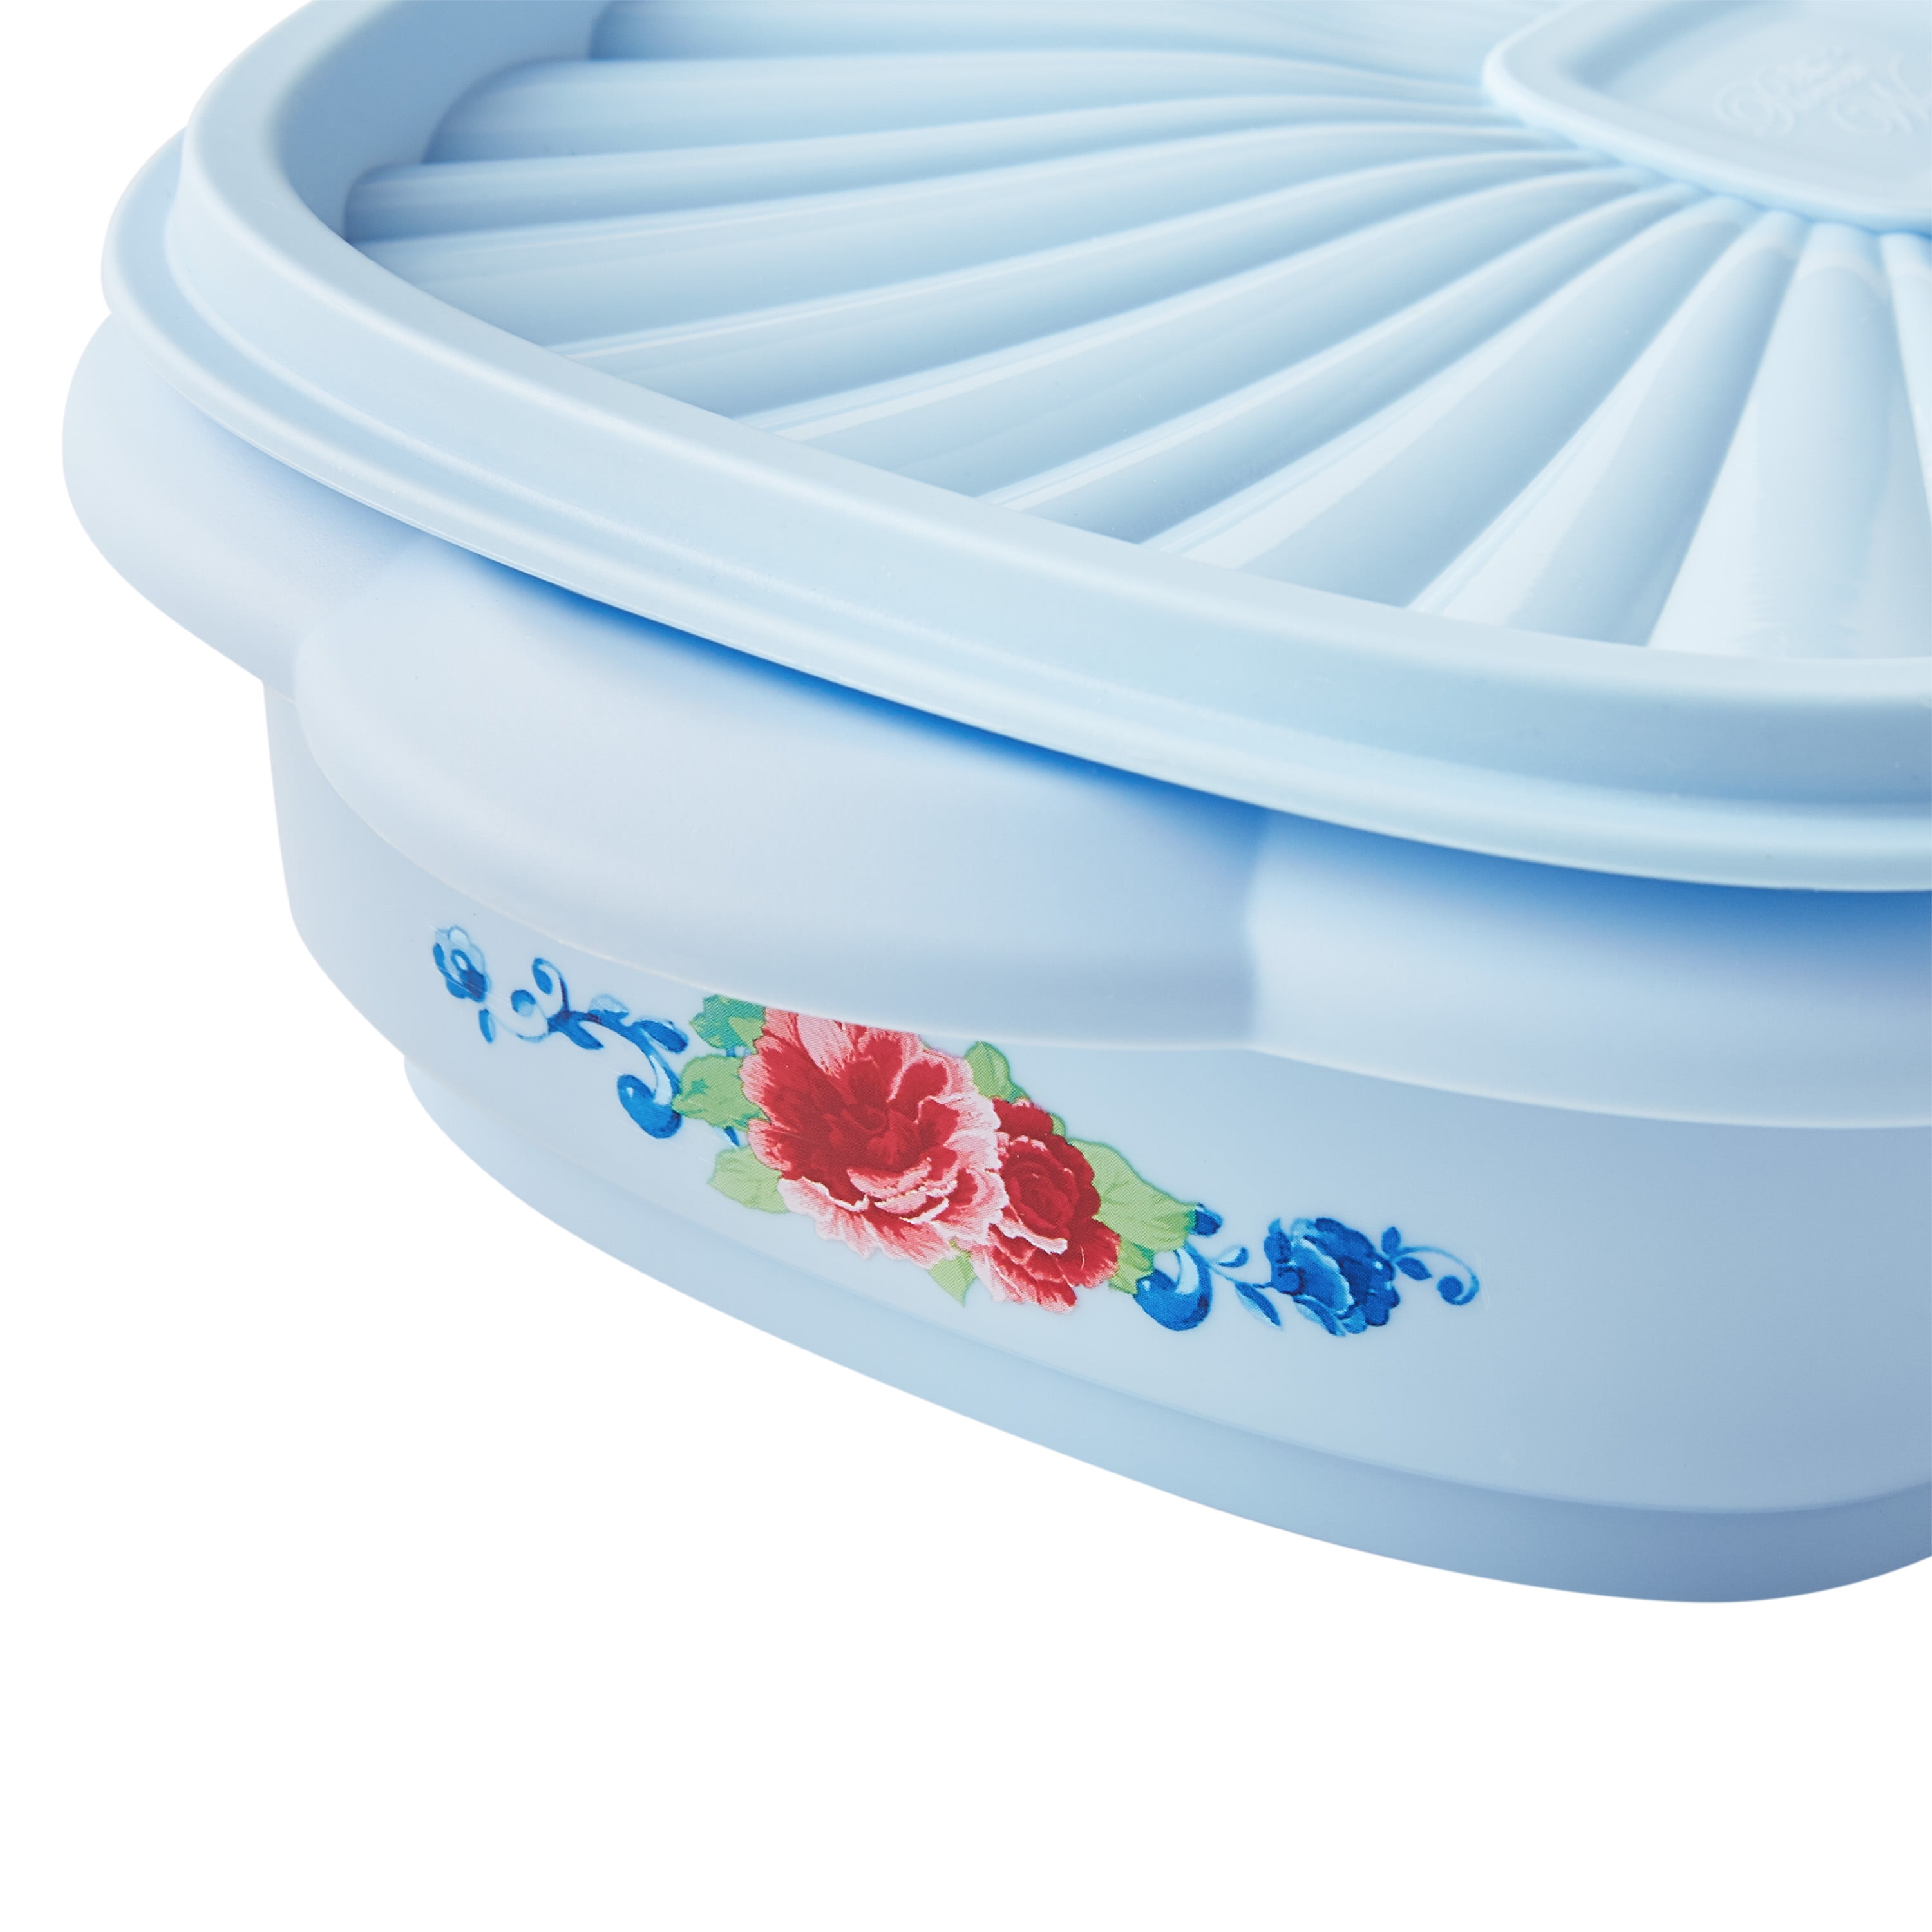 The Pioneer Woman 5 Cup Plastic Food Storage Container with Lid